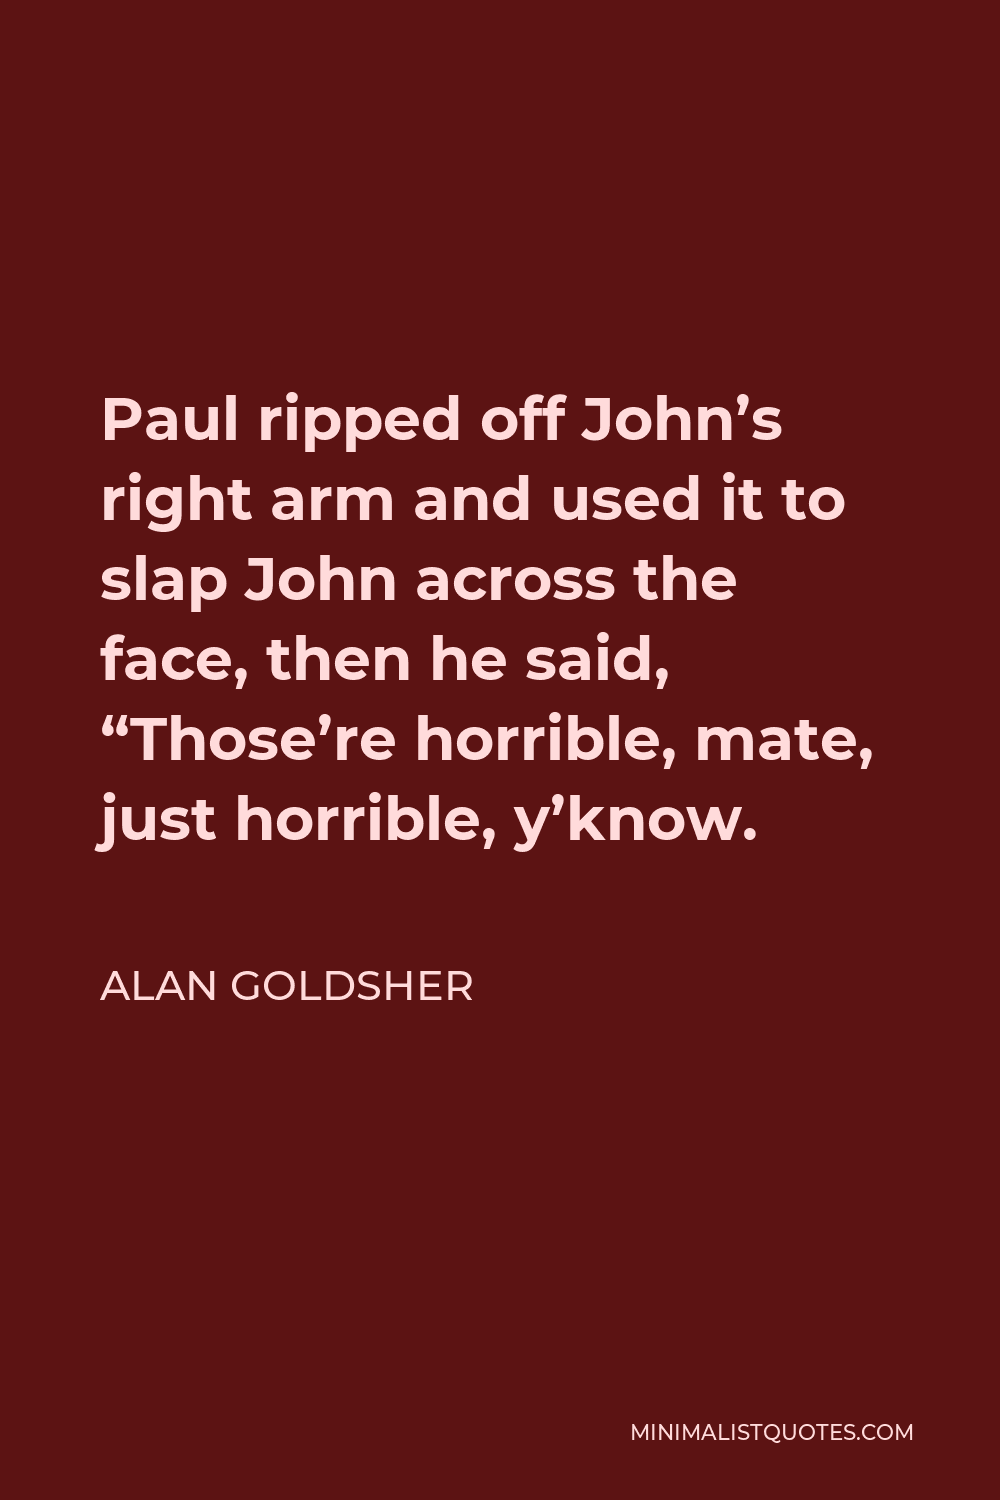 Alan Goldsher Quote - Paul ripped off John’s right arm and used it to slap John across the face, then he said, “Those’re horrible, mate, just horrible, y’know.